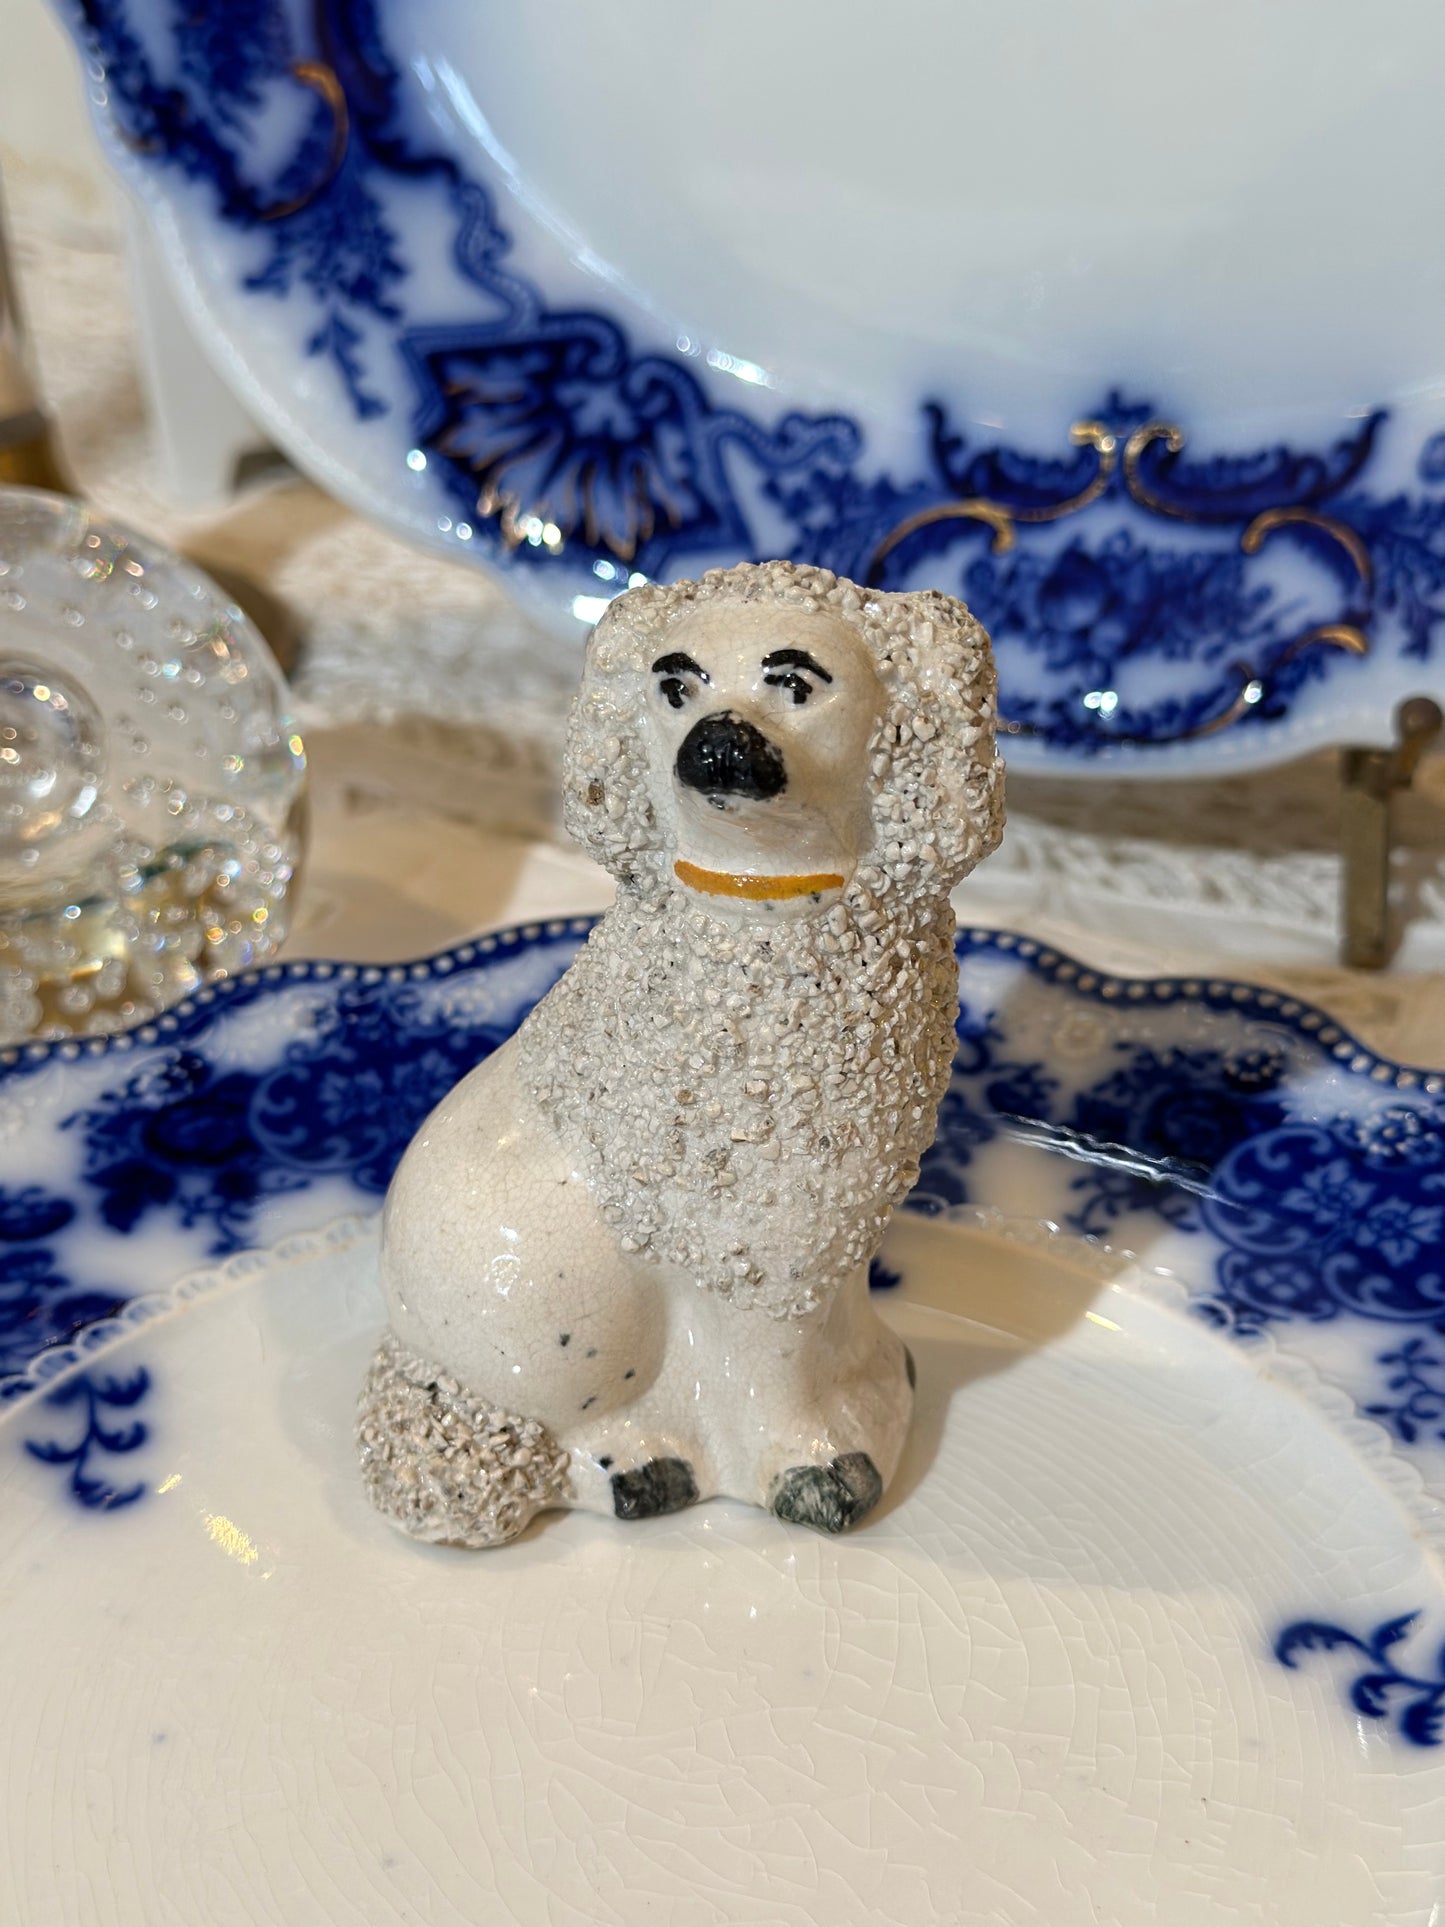 Darling Single Antique 19c. Staffordshire Poodle, 4” tall - excellent!